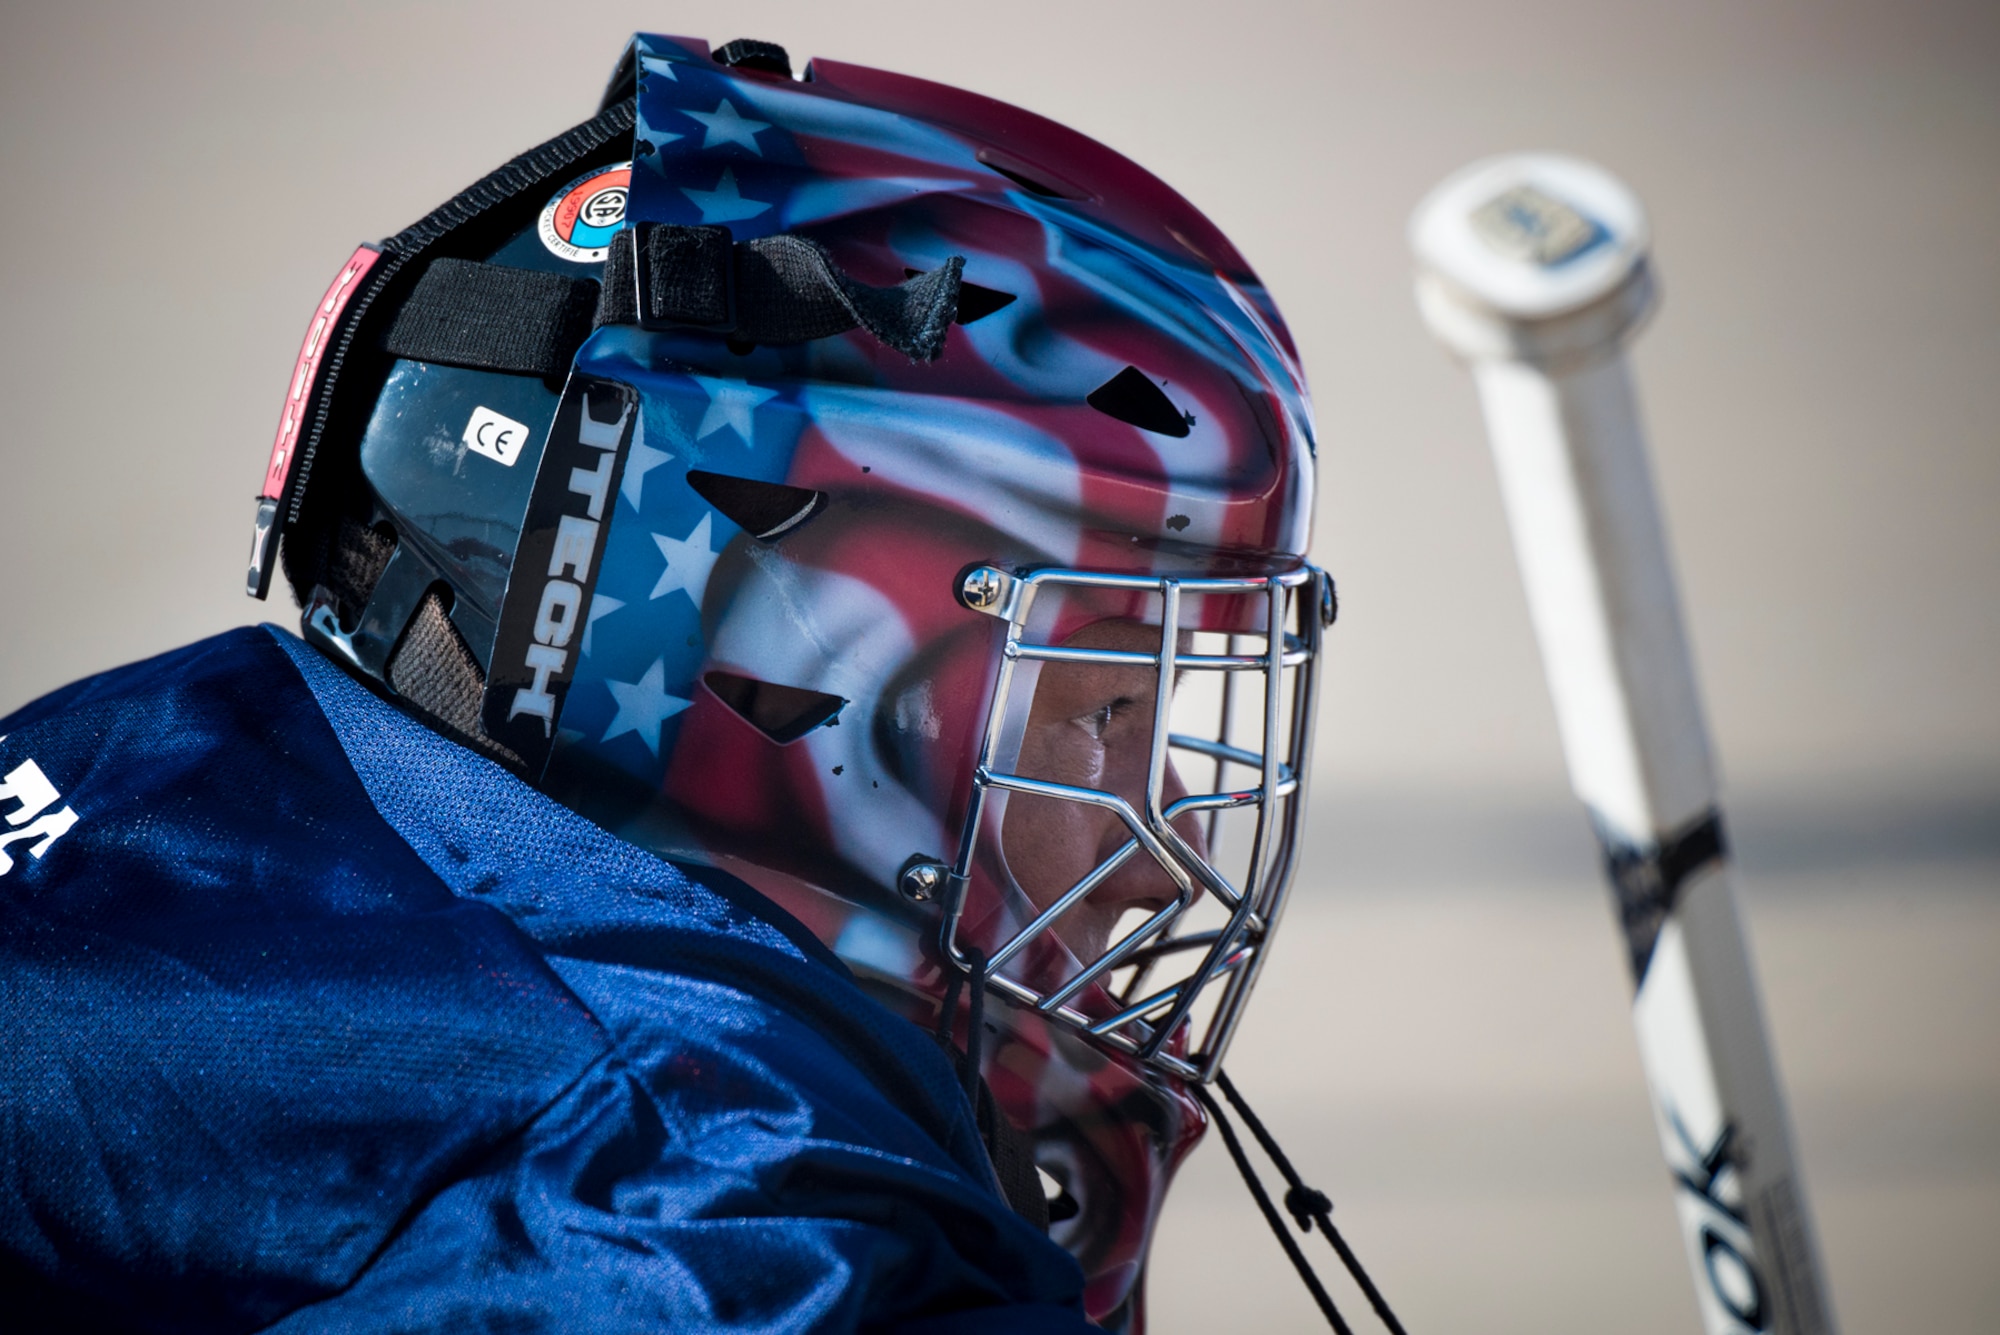 PETERSON AIR FORCE BASE, Colo. – Lt. Col. Miguel Rosales, 21st Plans and Programs commander, guards the net as the goalkeeper for the American team during the annual USA vs. Canada Ball Hockey Game at Peterson Air Force Base, Colo., Feb. 23, 2018. The Americans defeated the Canadians 3-2. (U.S. Air Force photo by Senior Airman Dennis Hoffman)